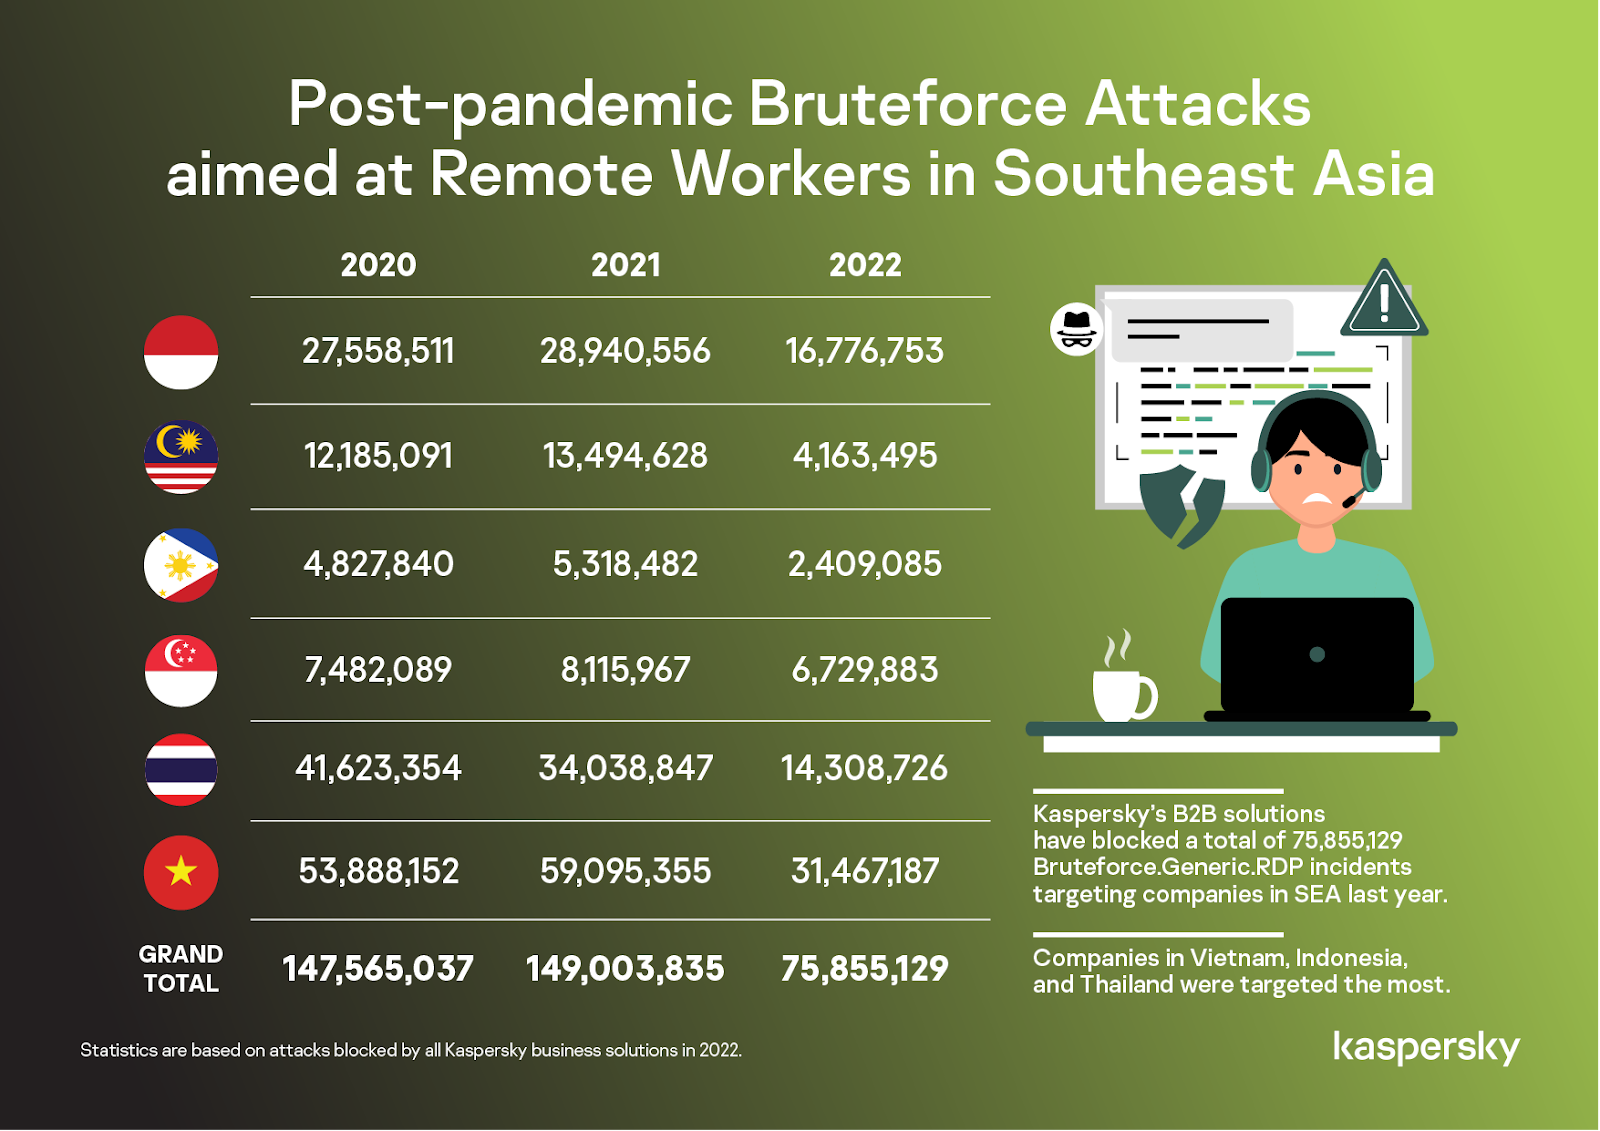 C:\Users\gonzales_r\AppData\Local\Microsoft\Windows\INetCache\Content.Word\Post-pandemic Bruteforce Attacks aimed at Remote Workers in Southeast Asia_Landscape_v2-01.png